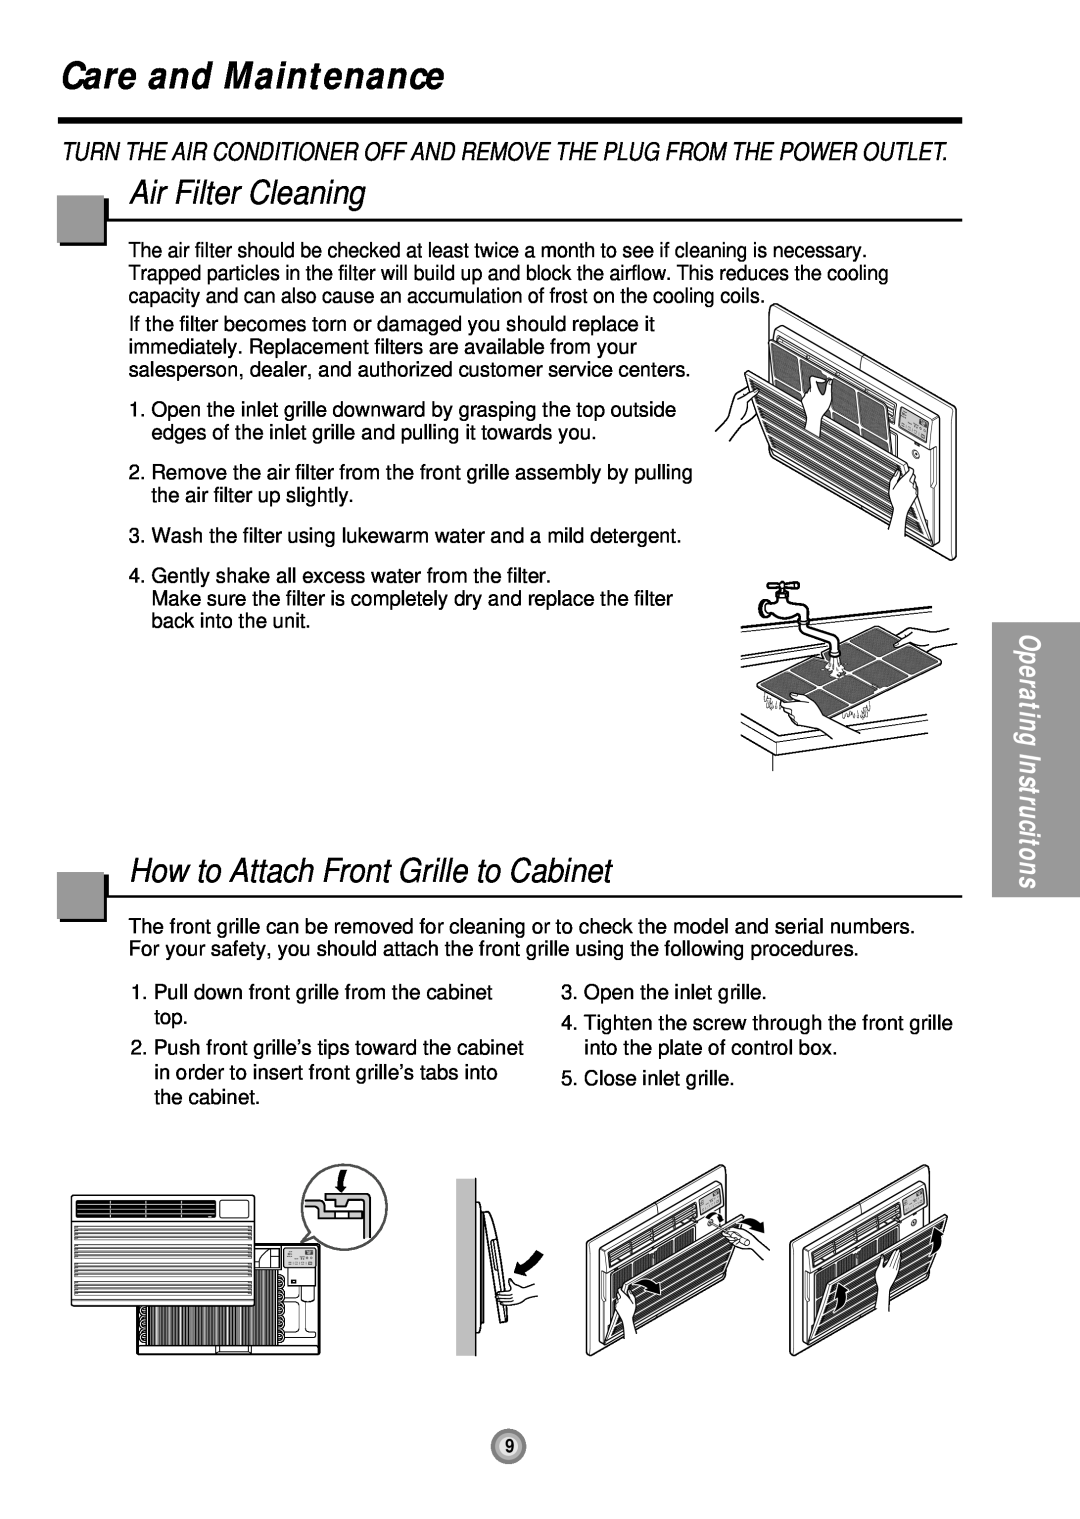 Friedrich US08, US10, US12 manual Care and Maintenance, Air Filter Cleaning, How to Attach Front Grille to Cabinet 